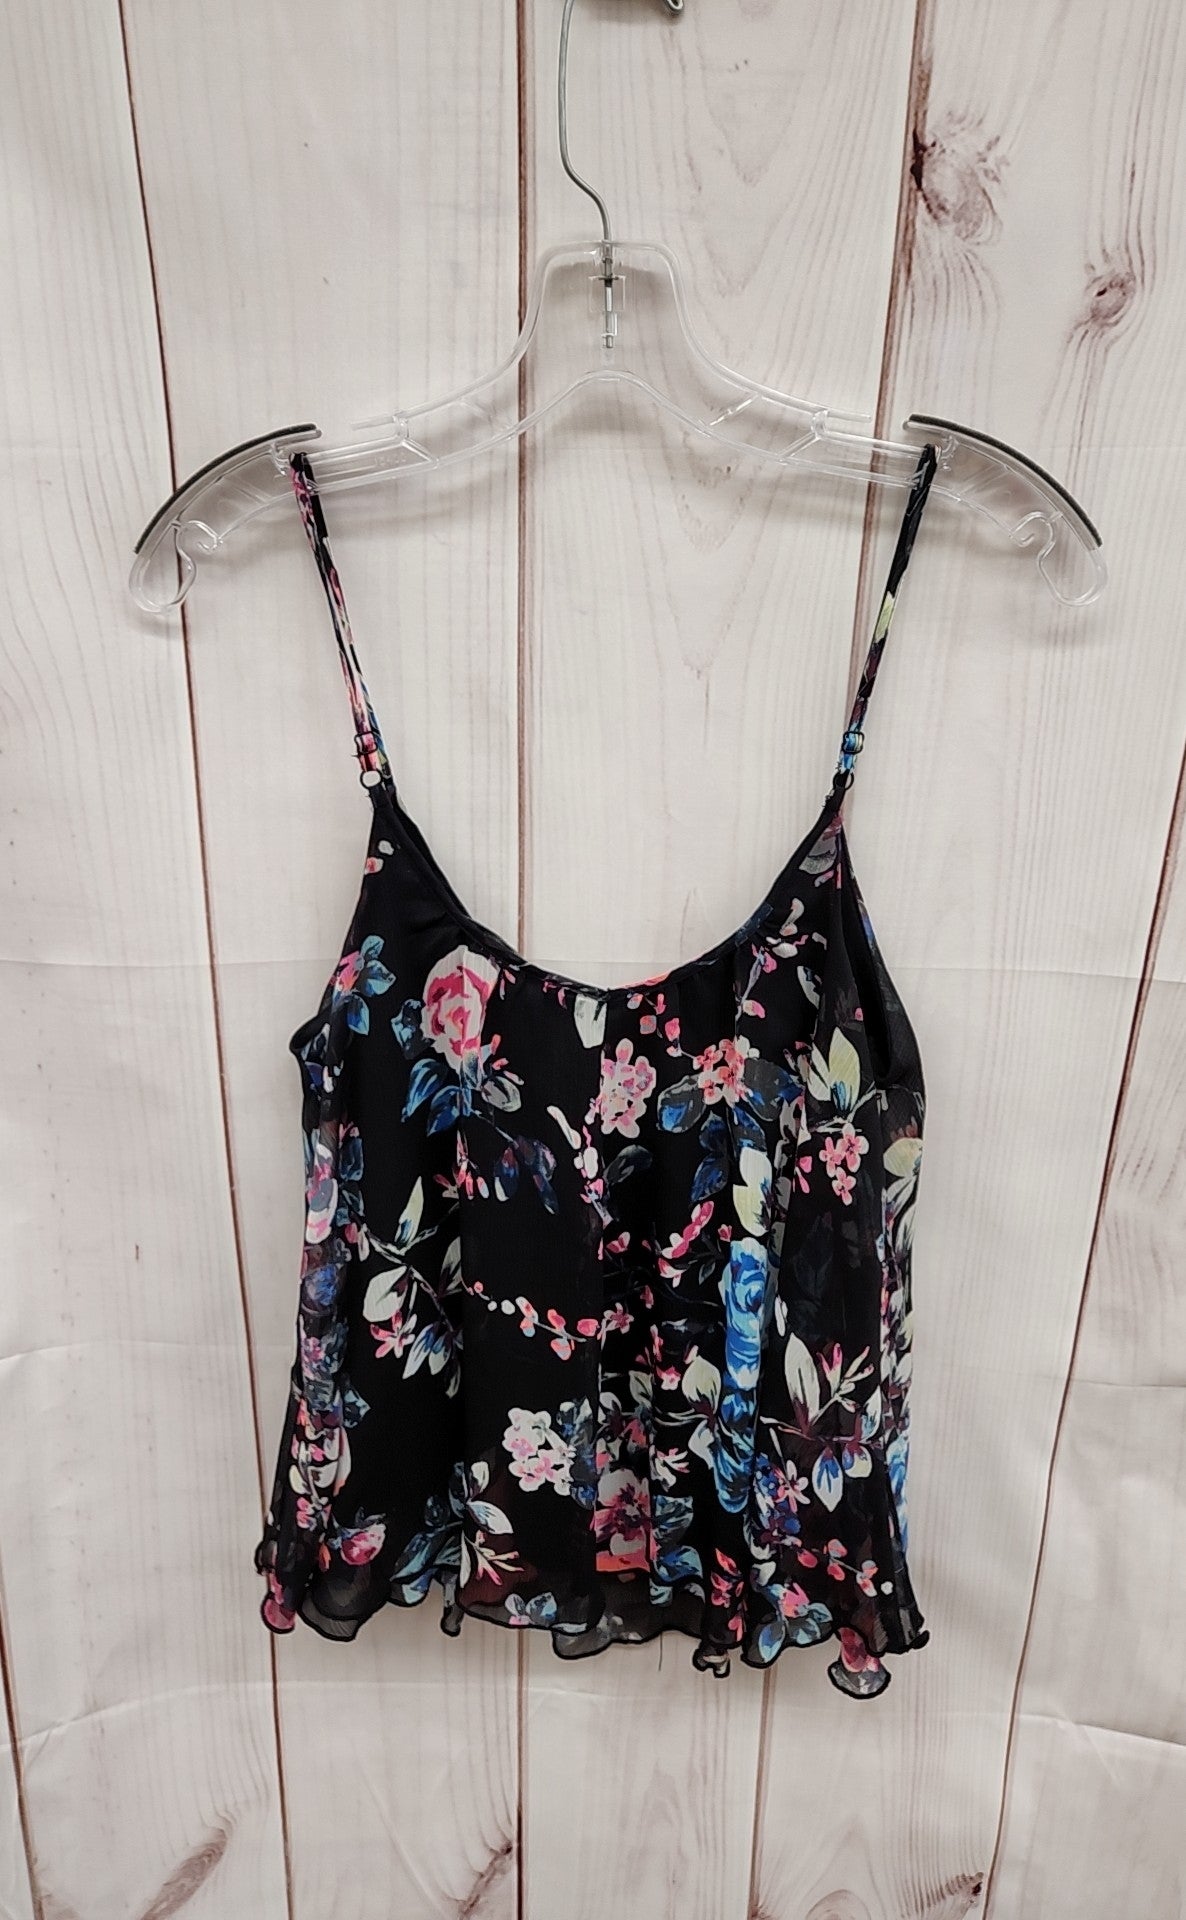 Express Women's Size S Black Floral Sleeveless Top